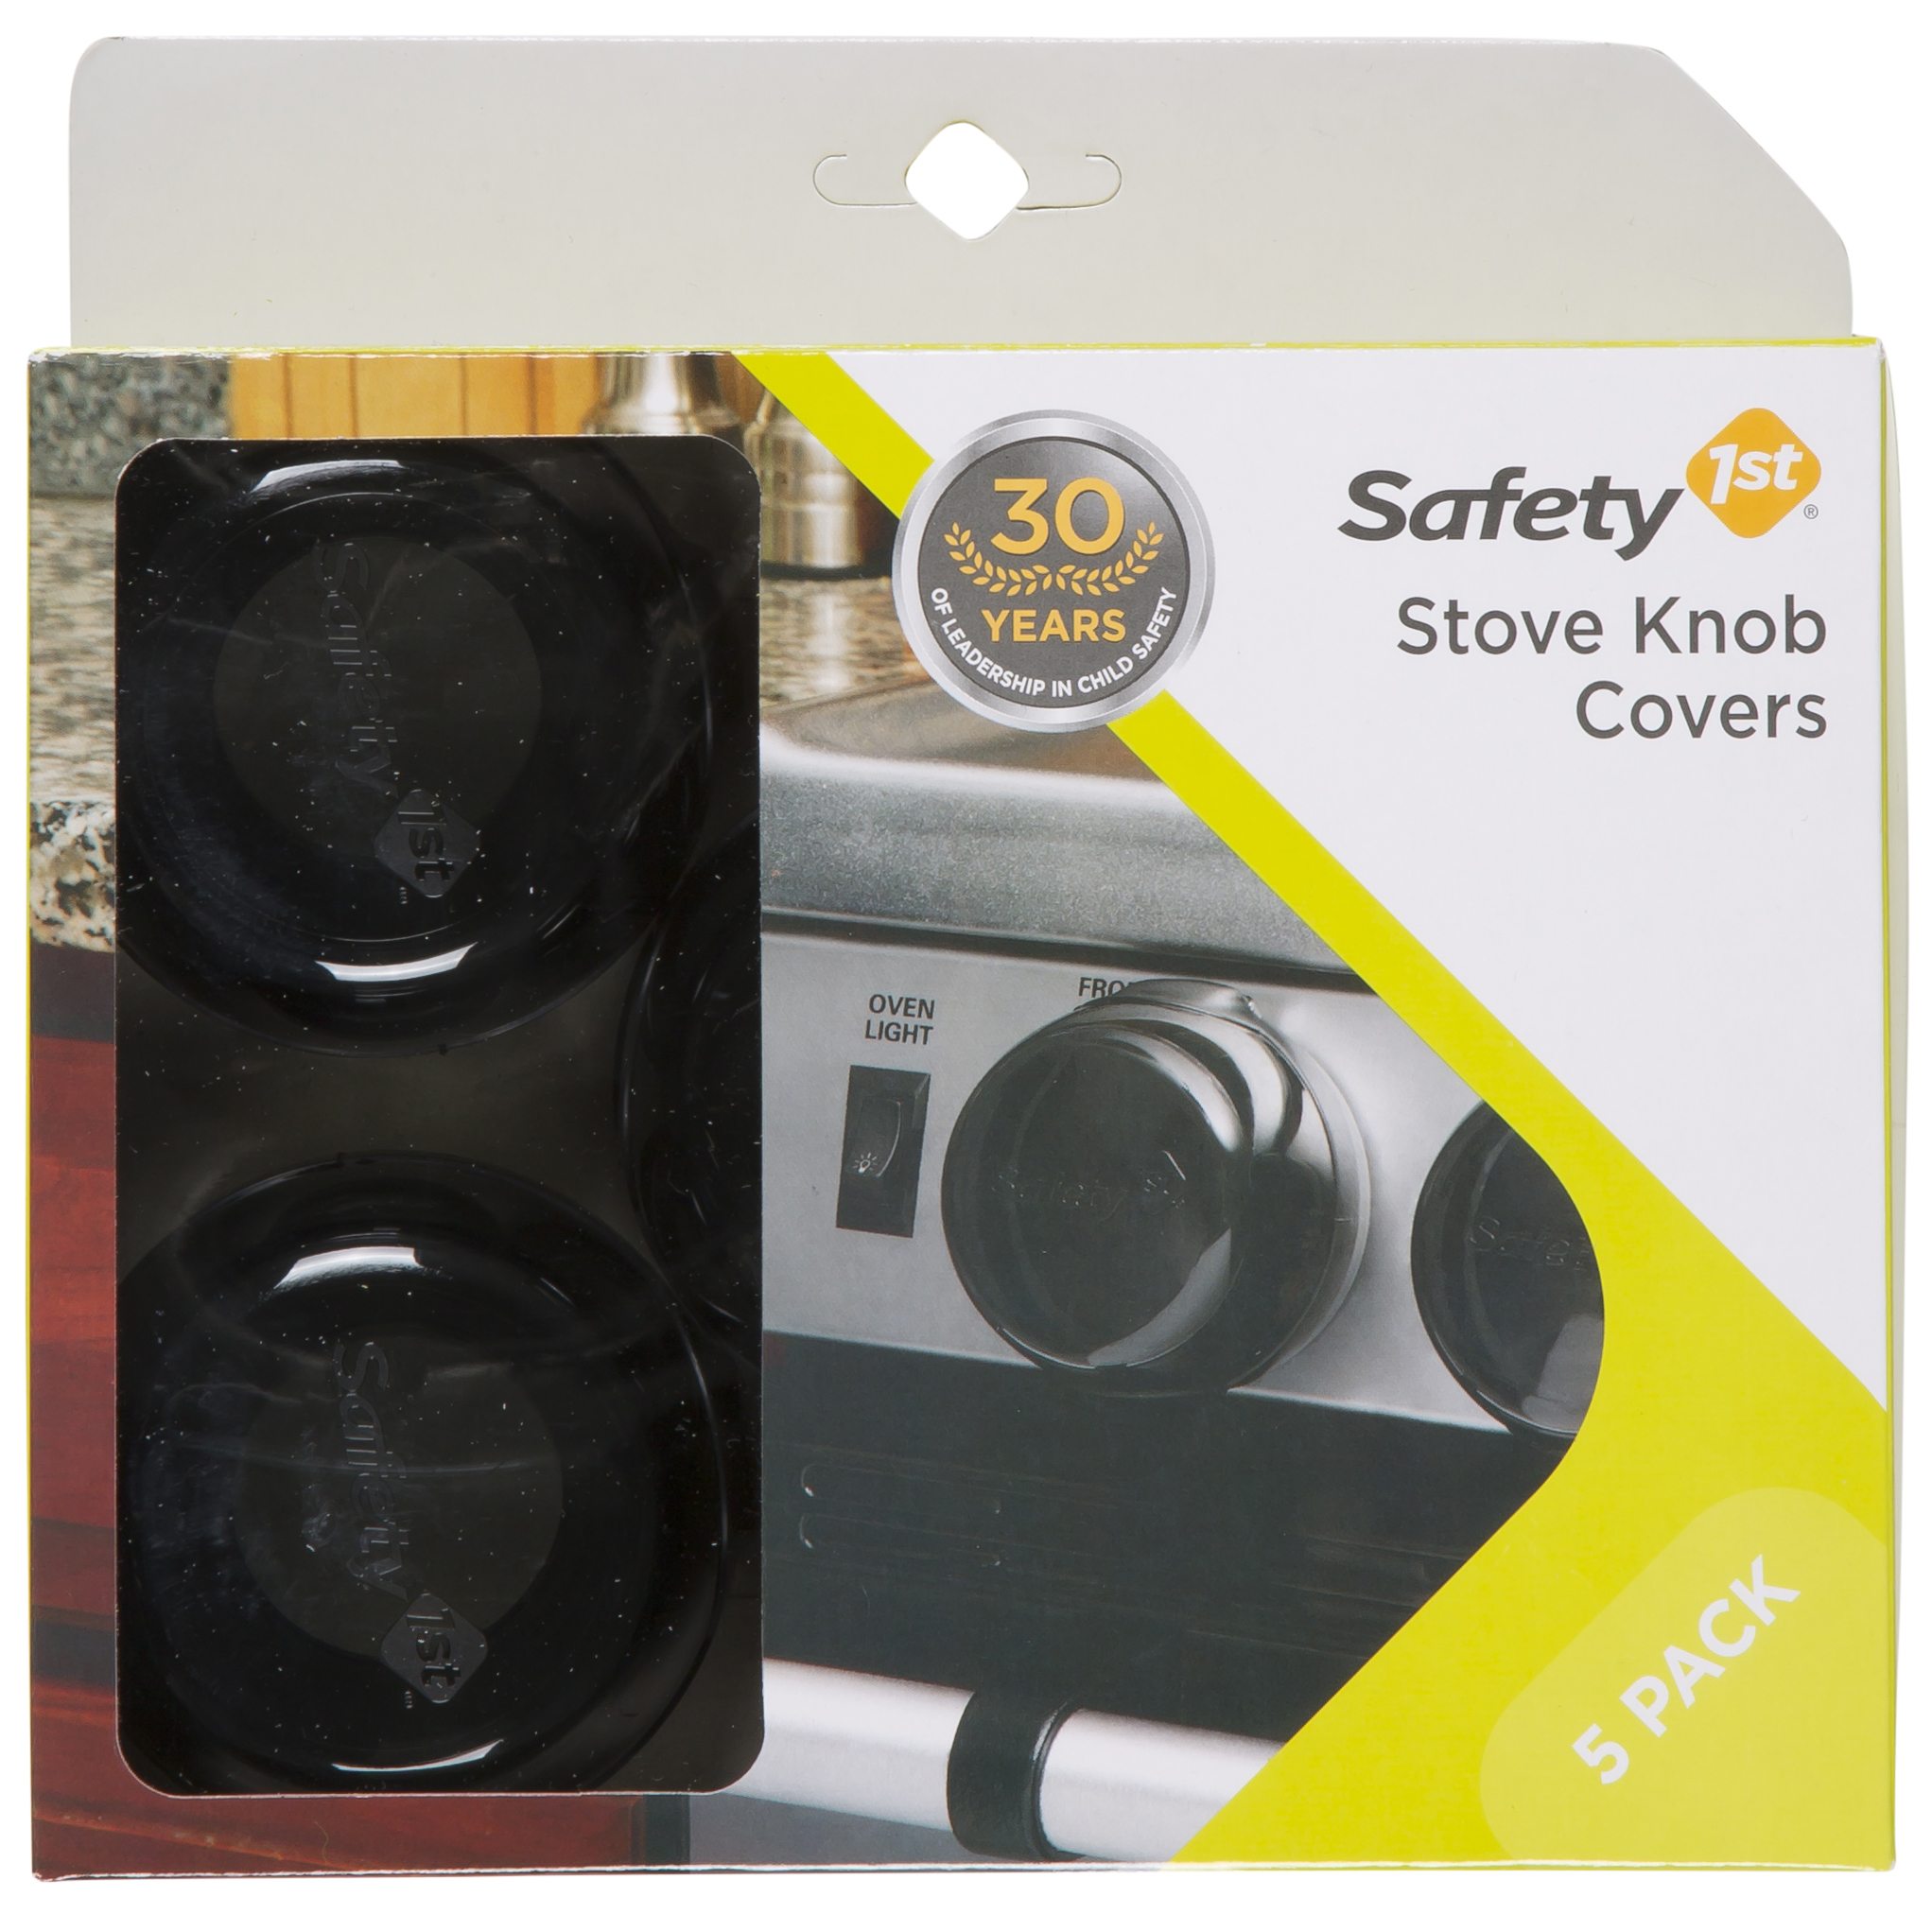 Safety 1st Universal Design Stove Knob Covers, Black - image 4 of 4